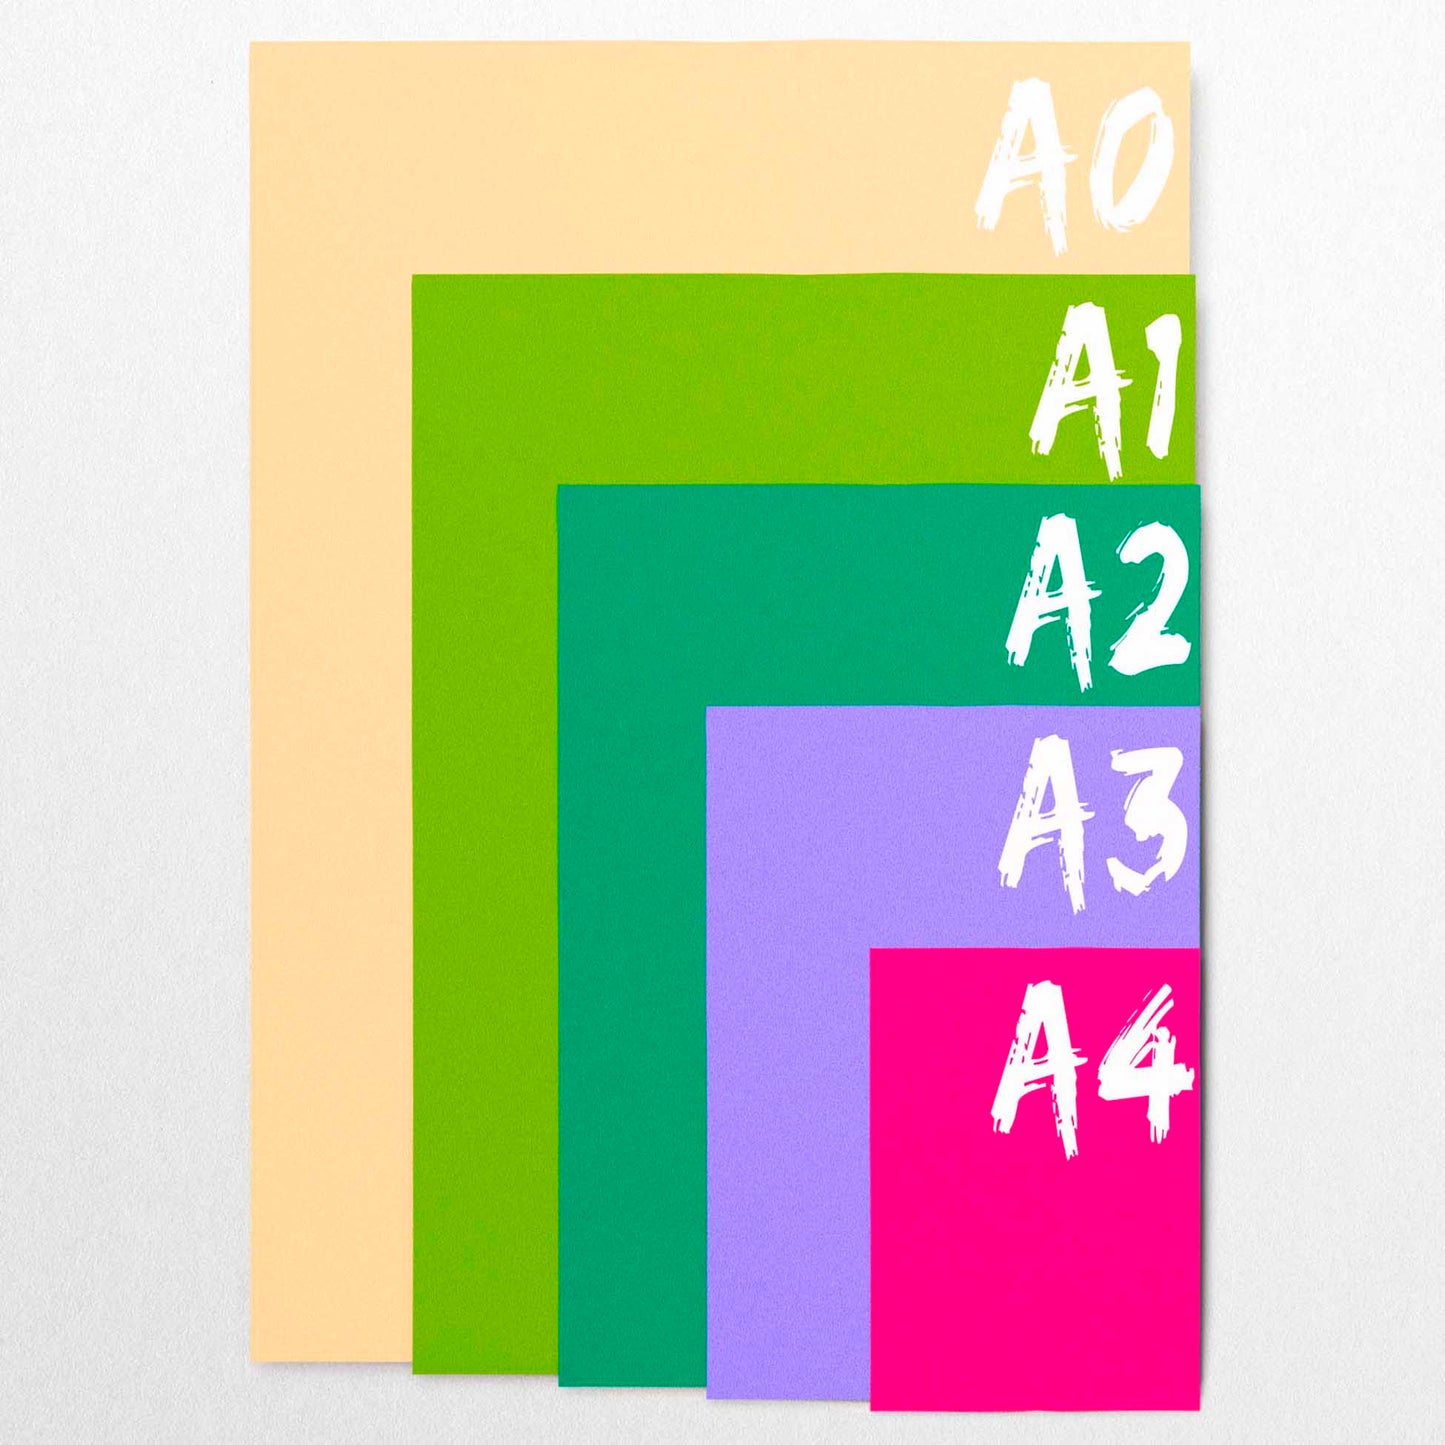 Show off your pic in unique, personality-filled style with this Personalised Pop Art Print! It's the perfect choice for unleashing the bold, vibrant, and oh-so-cool flow of colors, with pink, orange, green, blue, and purple hues